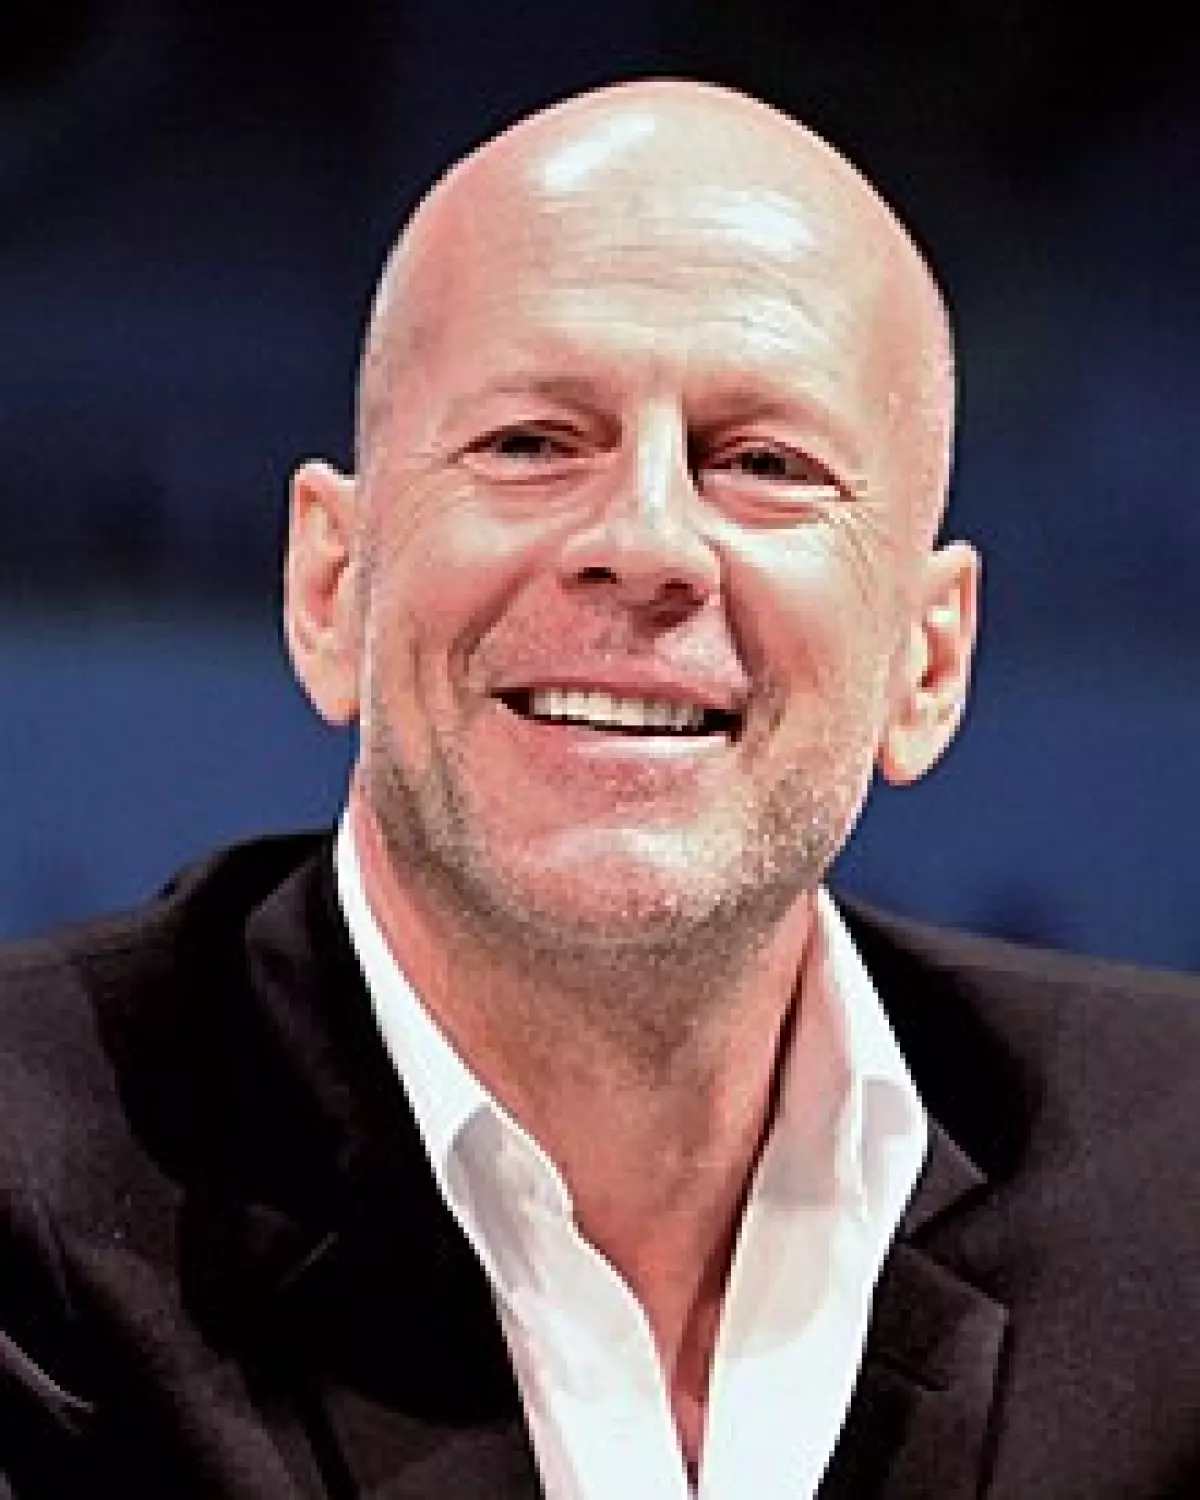 Bruce Willis at the 2010 San Diego Comic-Con